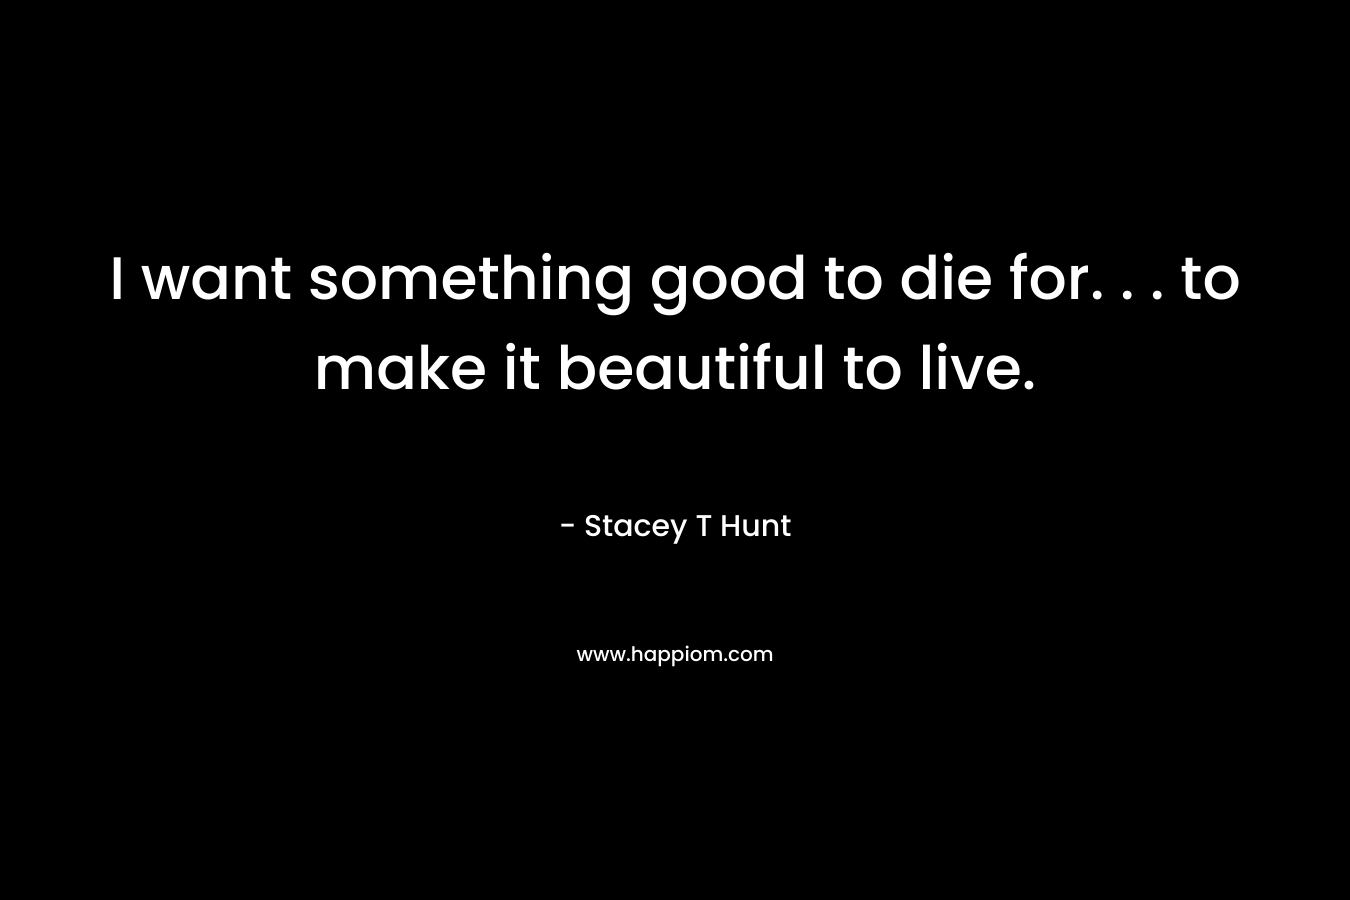 I want something good to die for. . . to make it beautiful to live. – Stacey T Hunt